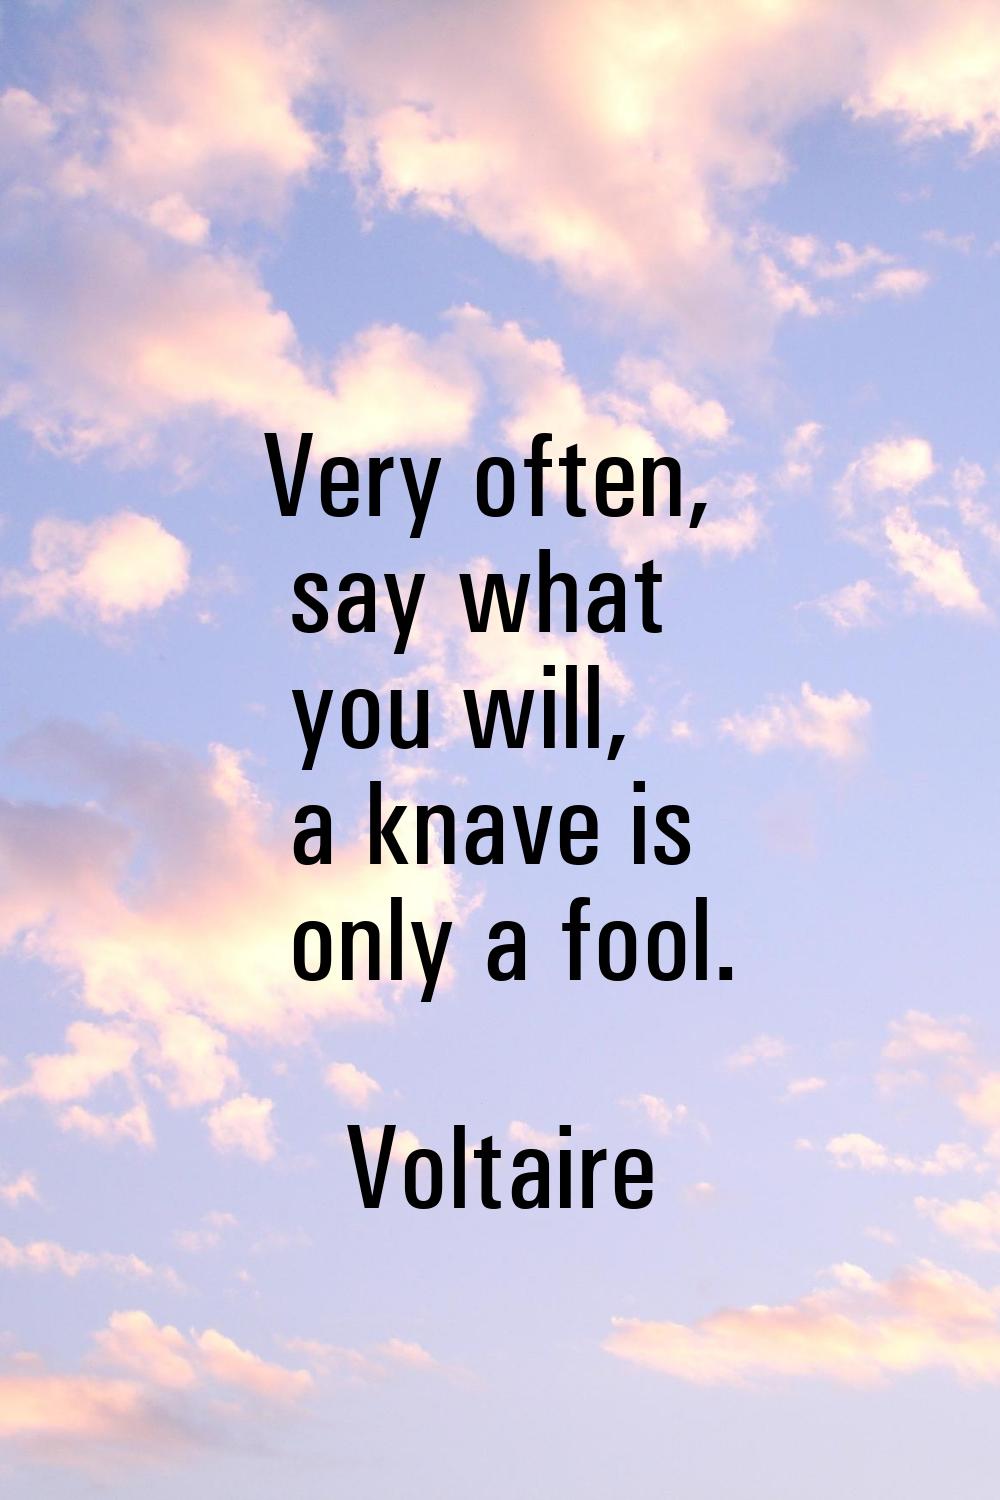 Very often, say what you will, a knave is only a fool.